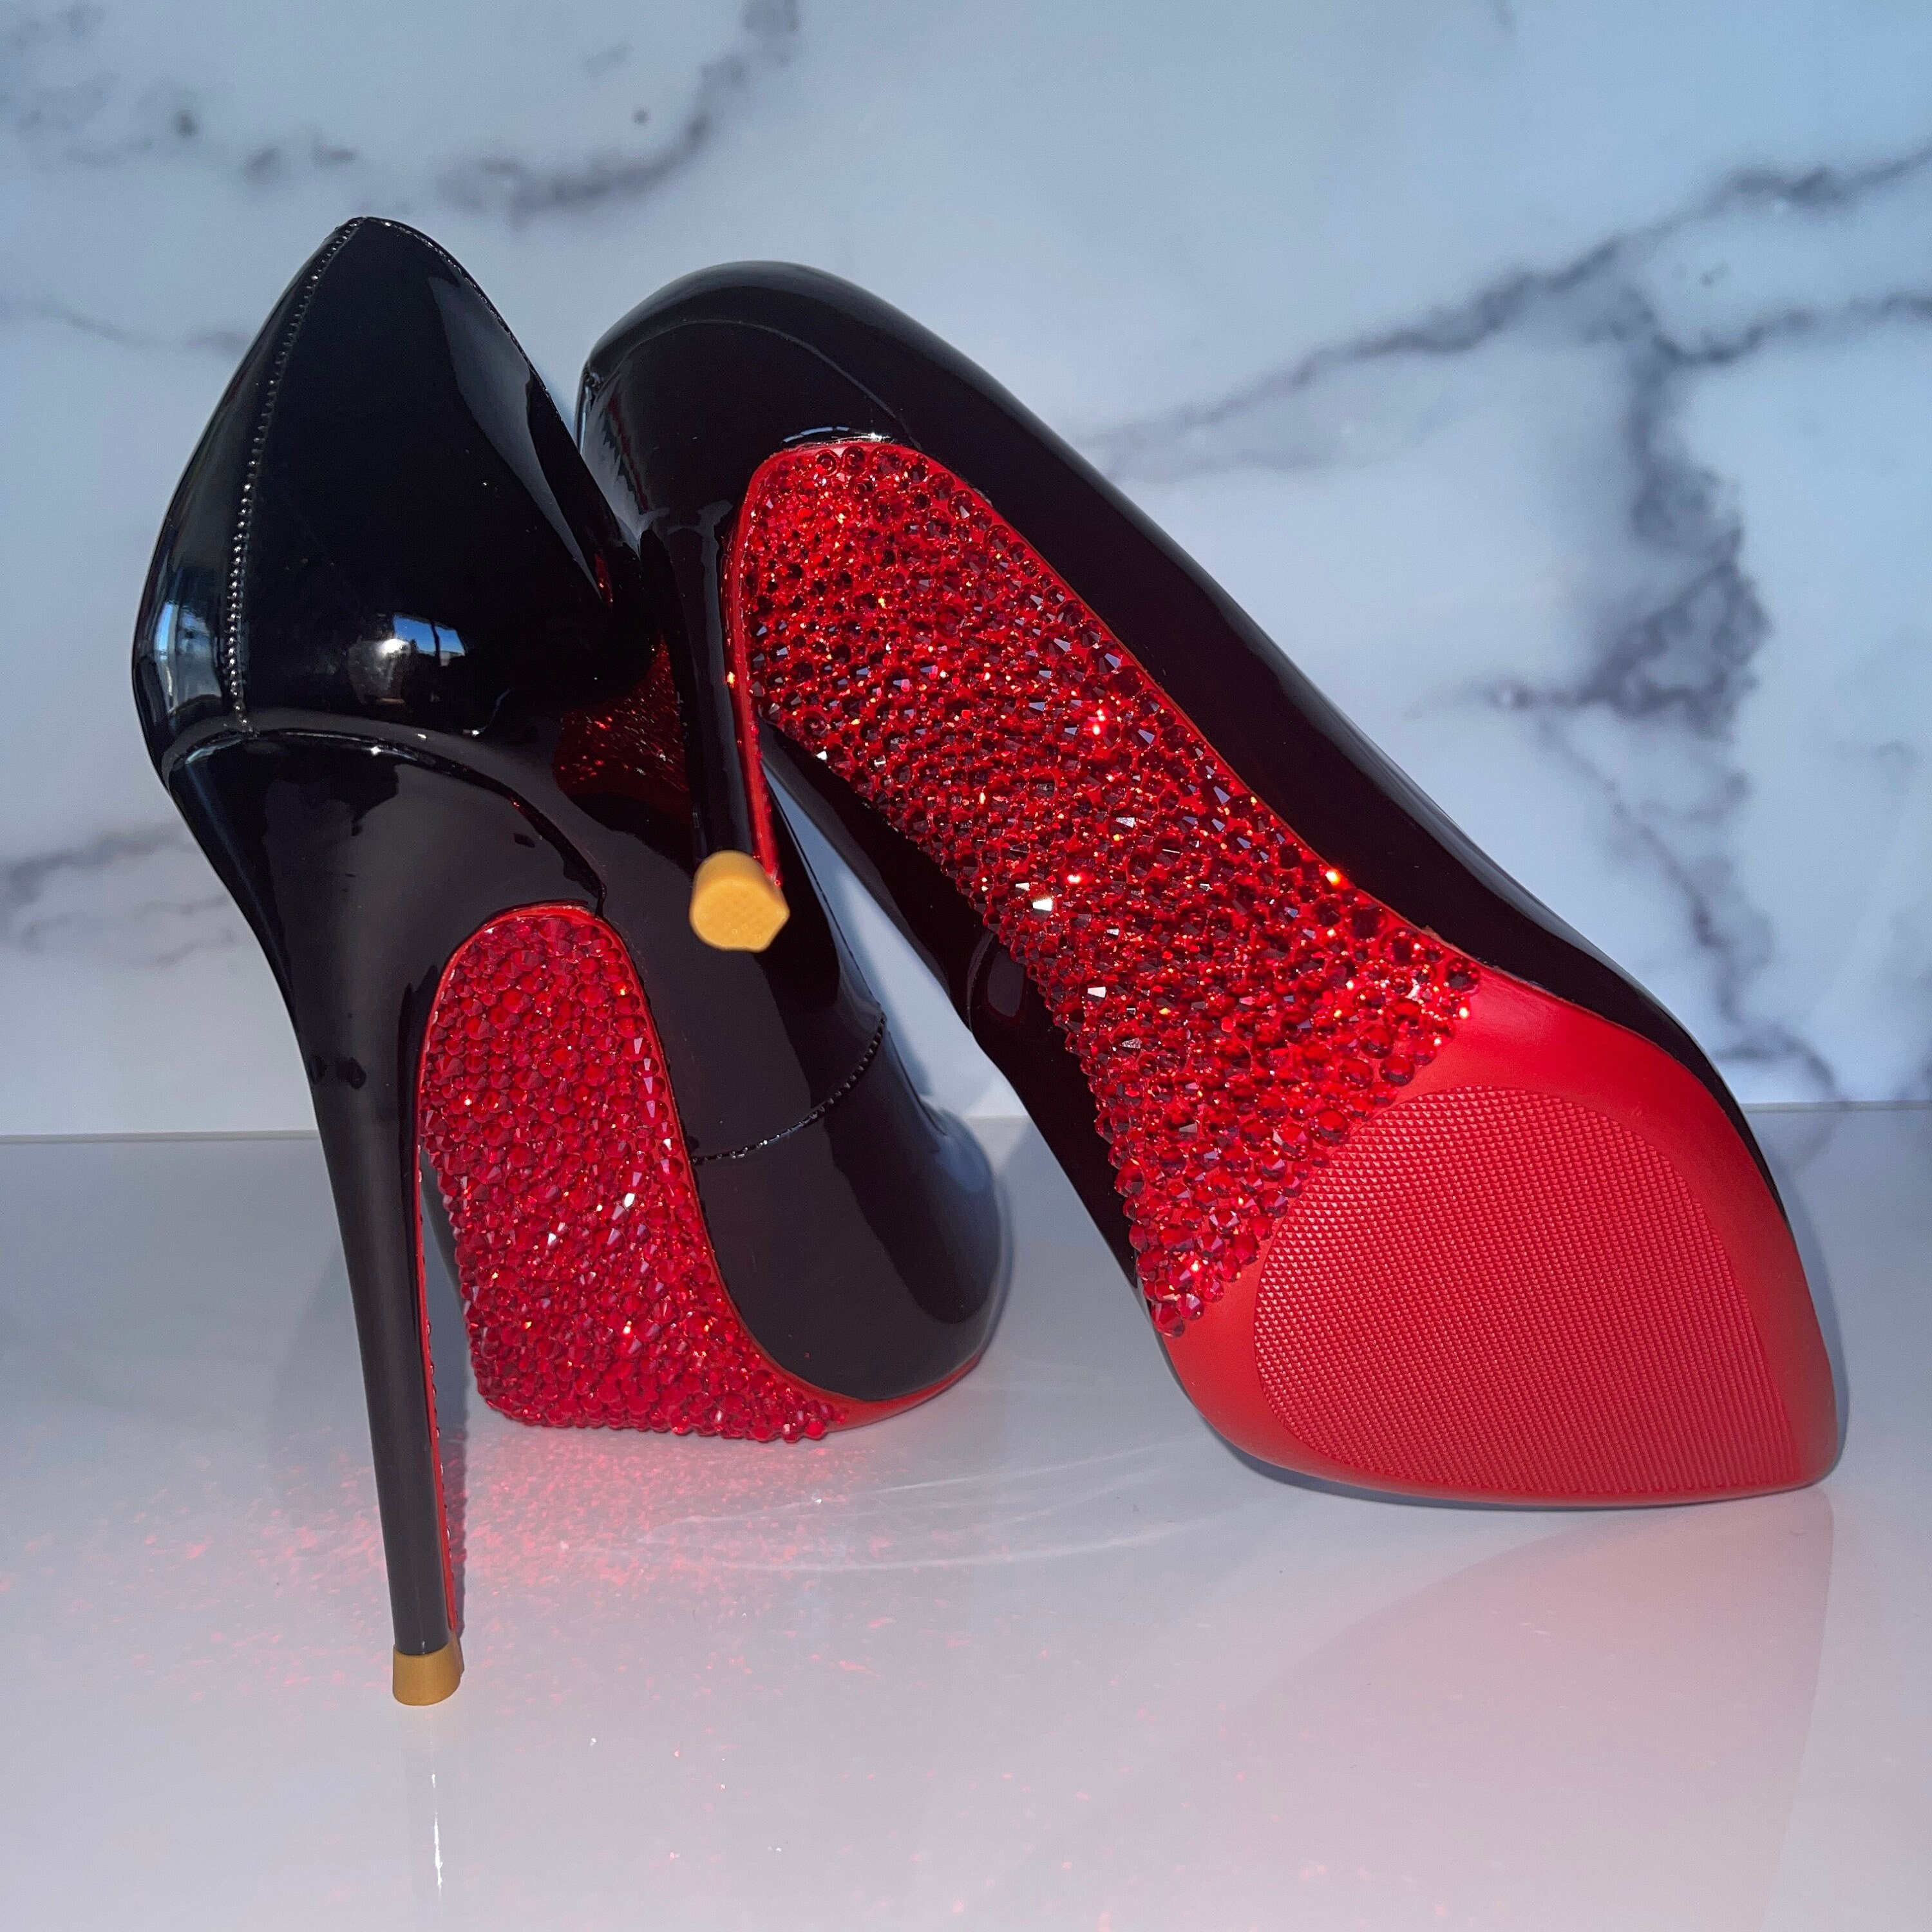 red bottom heels by louis vuitton, fake christian louboutin boots